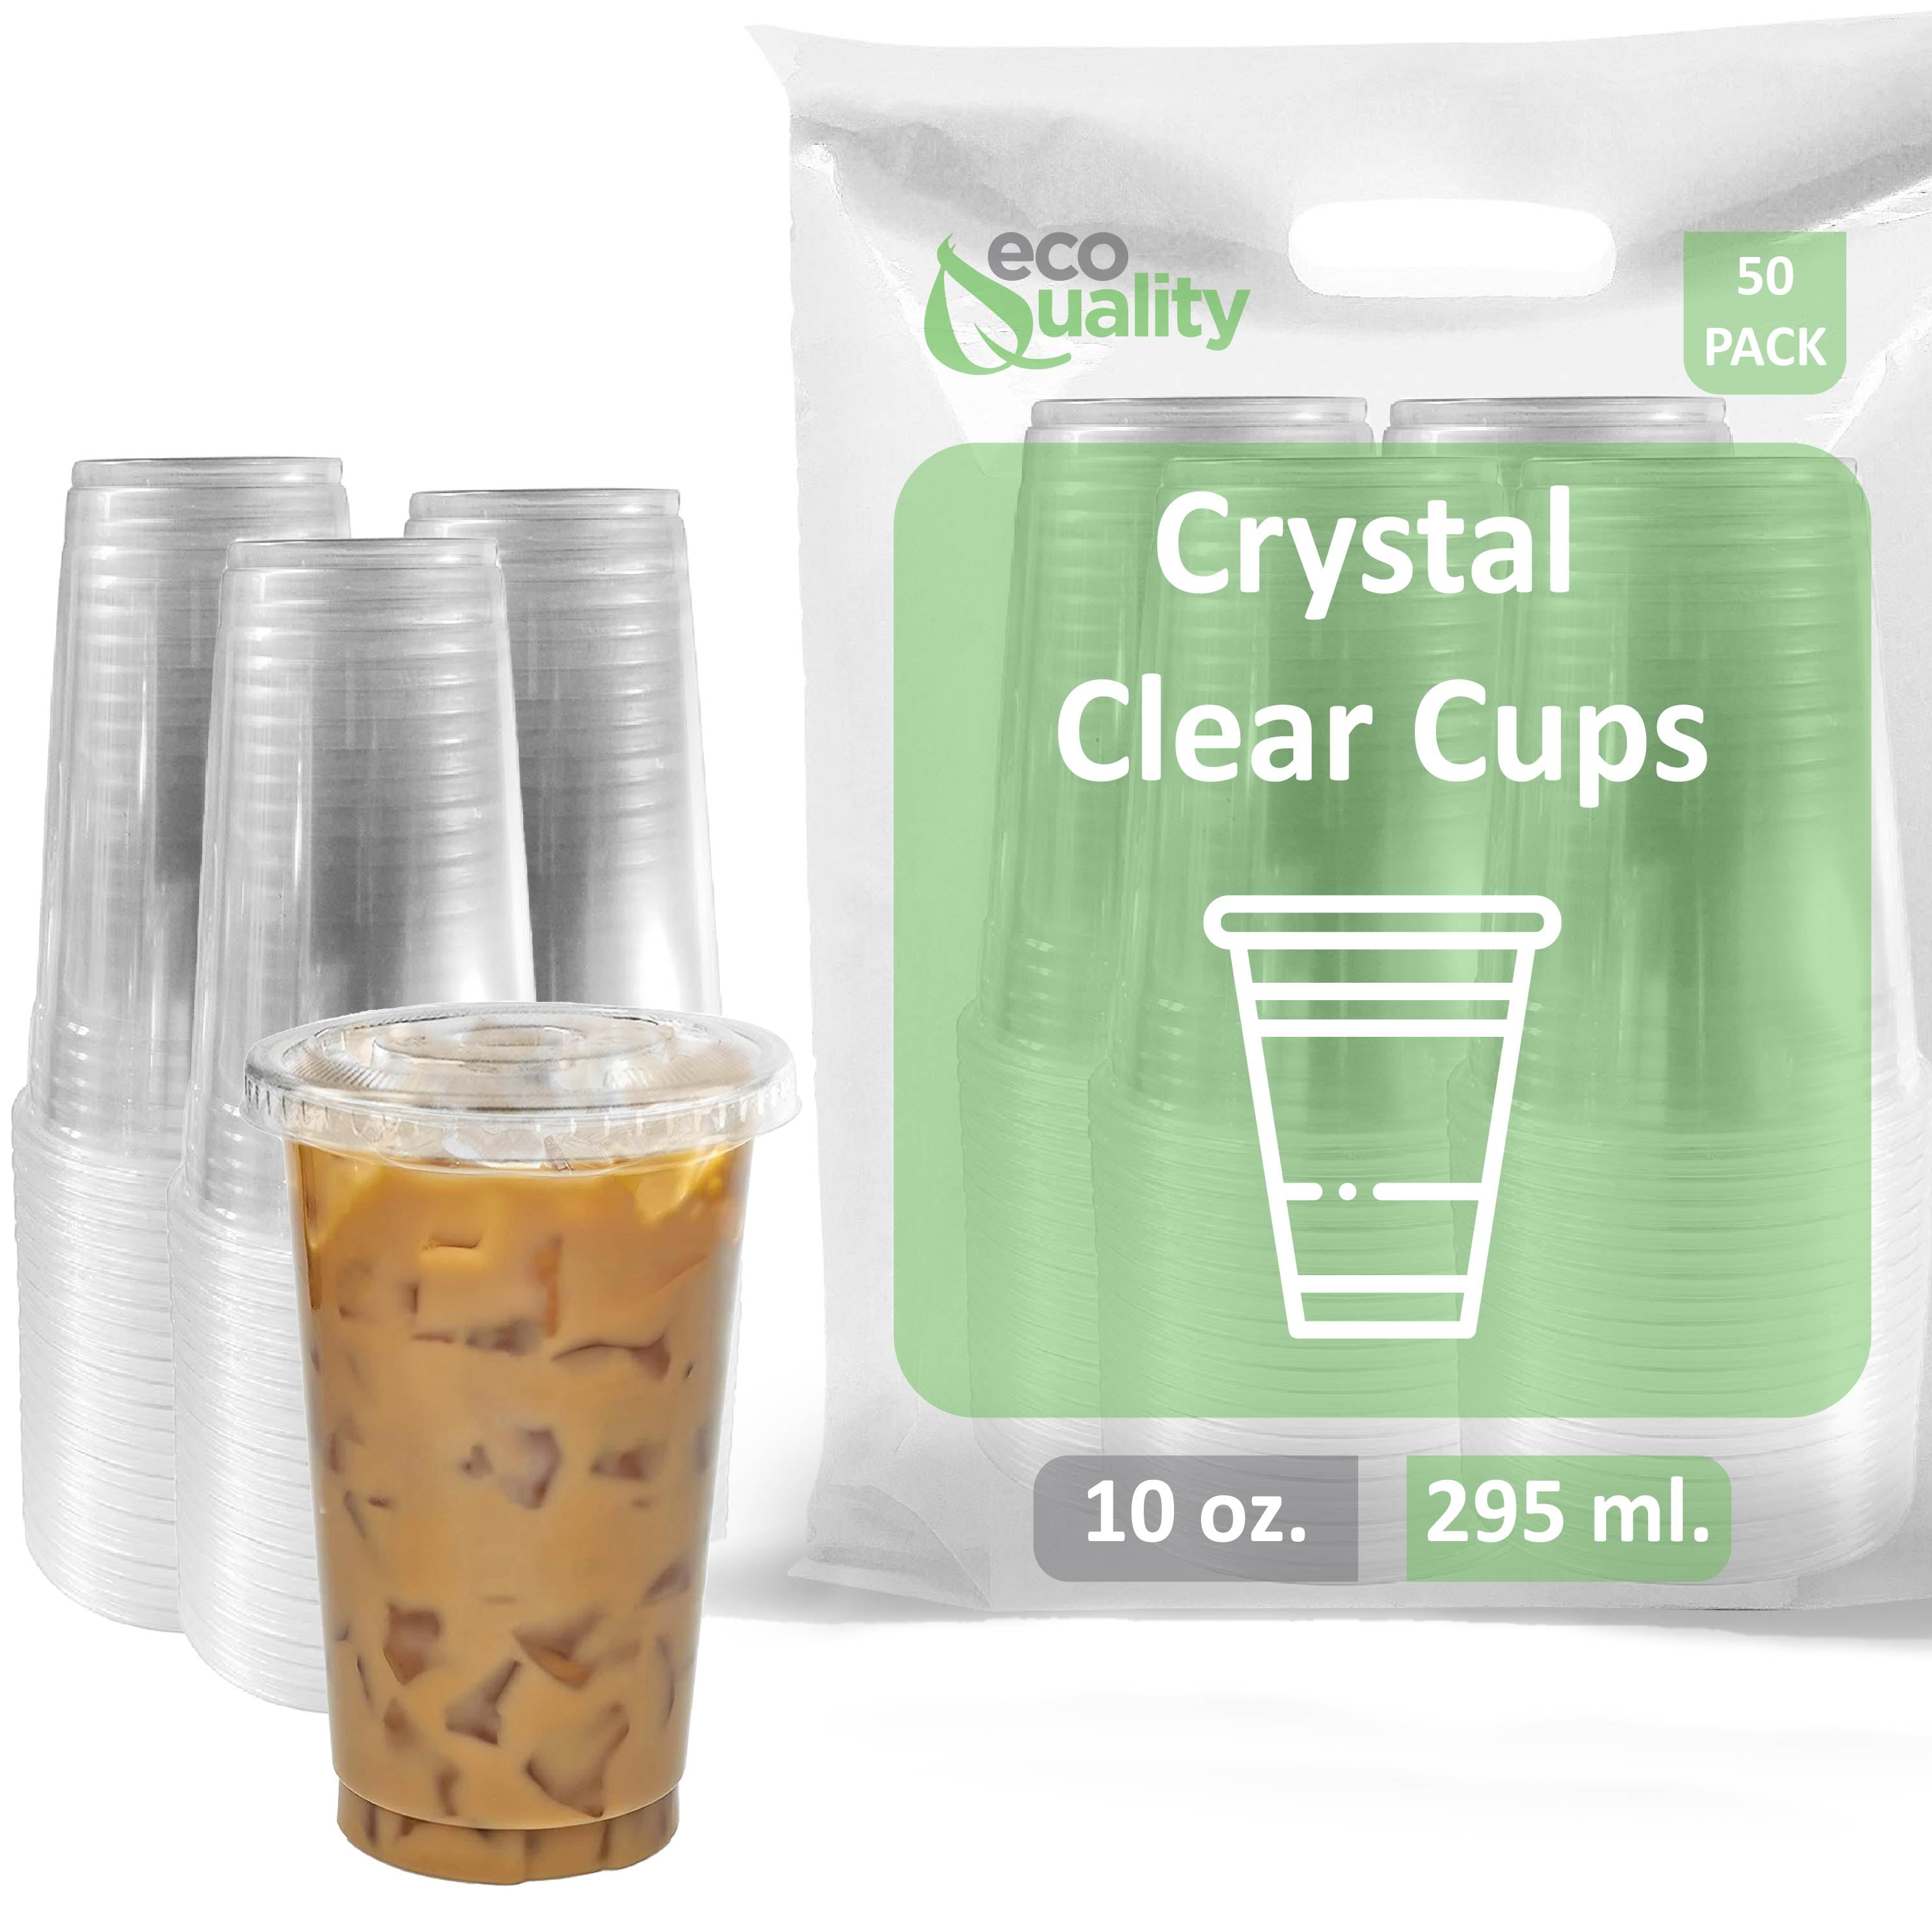 Lishuaiier 40PCS Disposable Clear Plastic Cups with Lids and forks, Glass  PET Dessert Parfait Cups for Iced Coffee, Cold Drinks, Smoothie, Juice